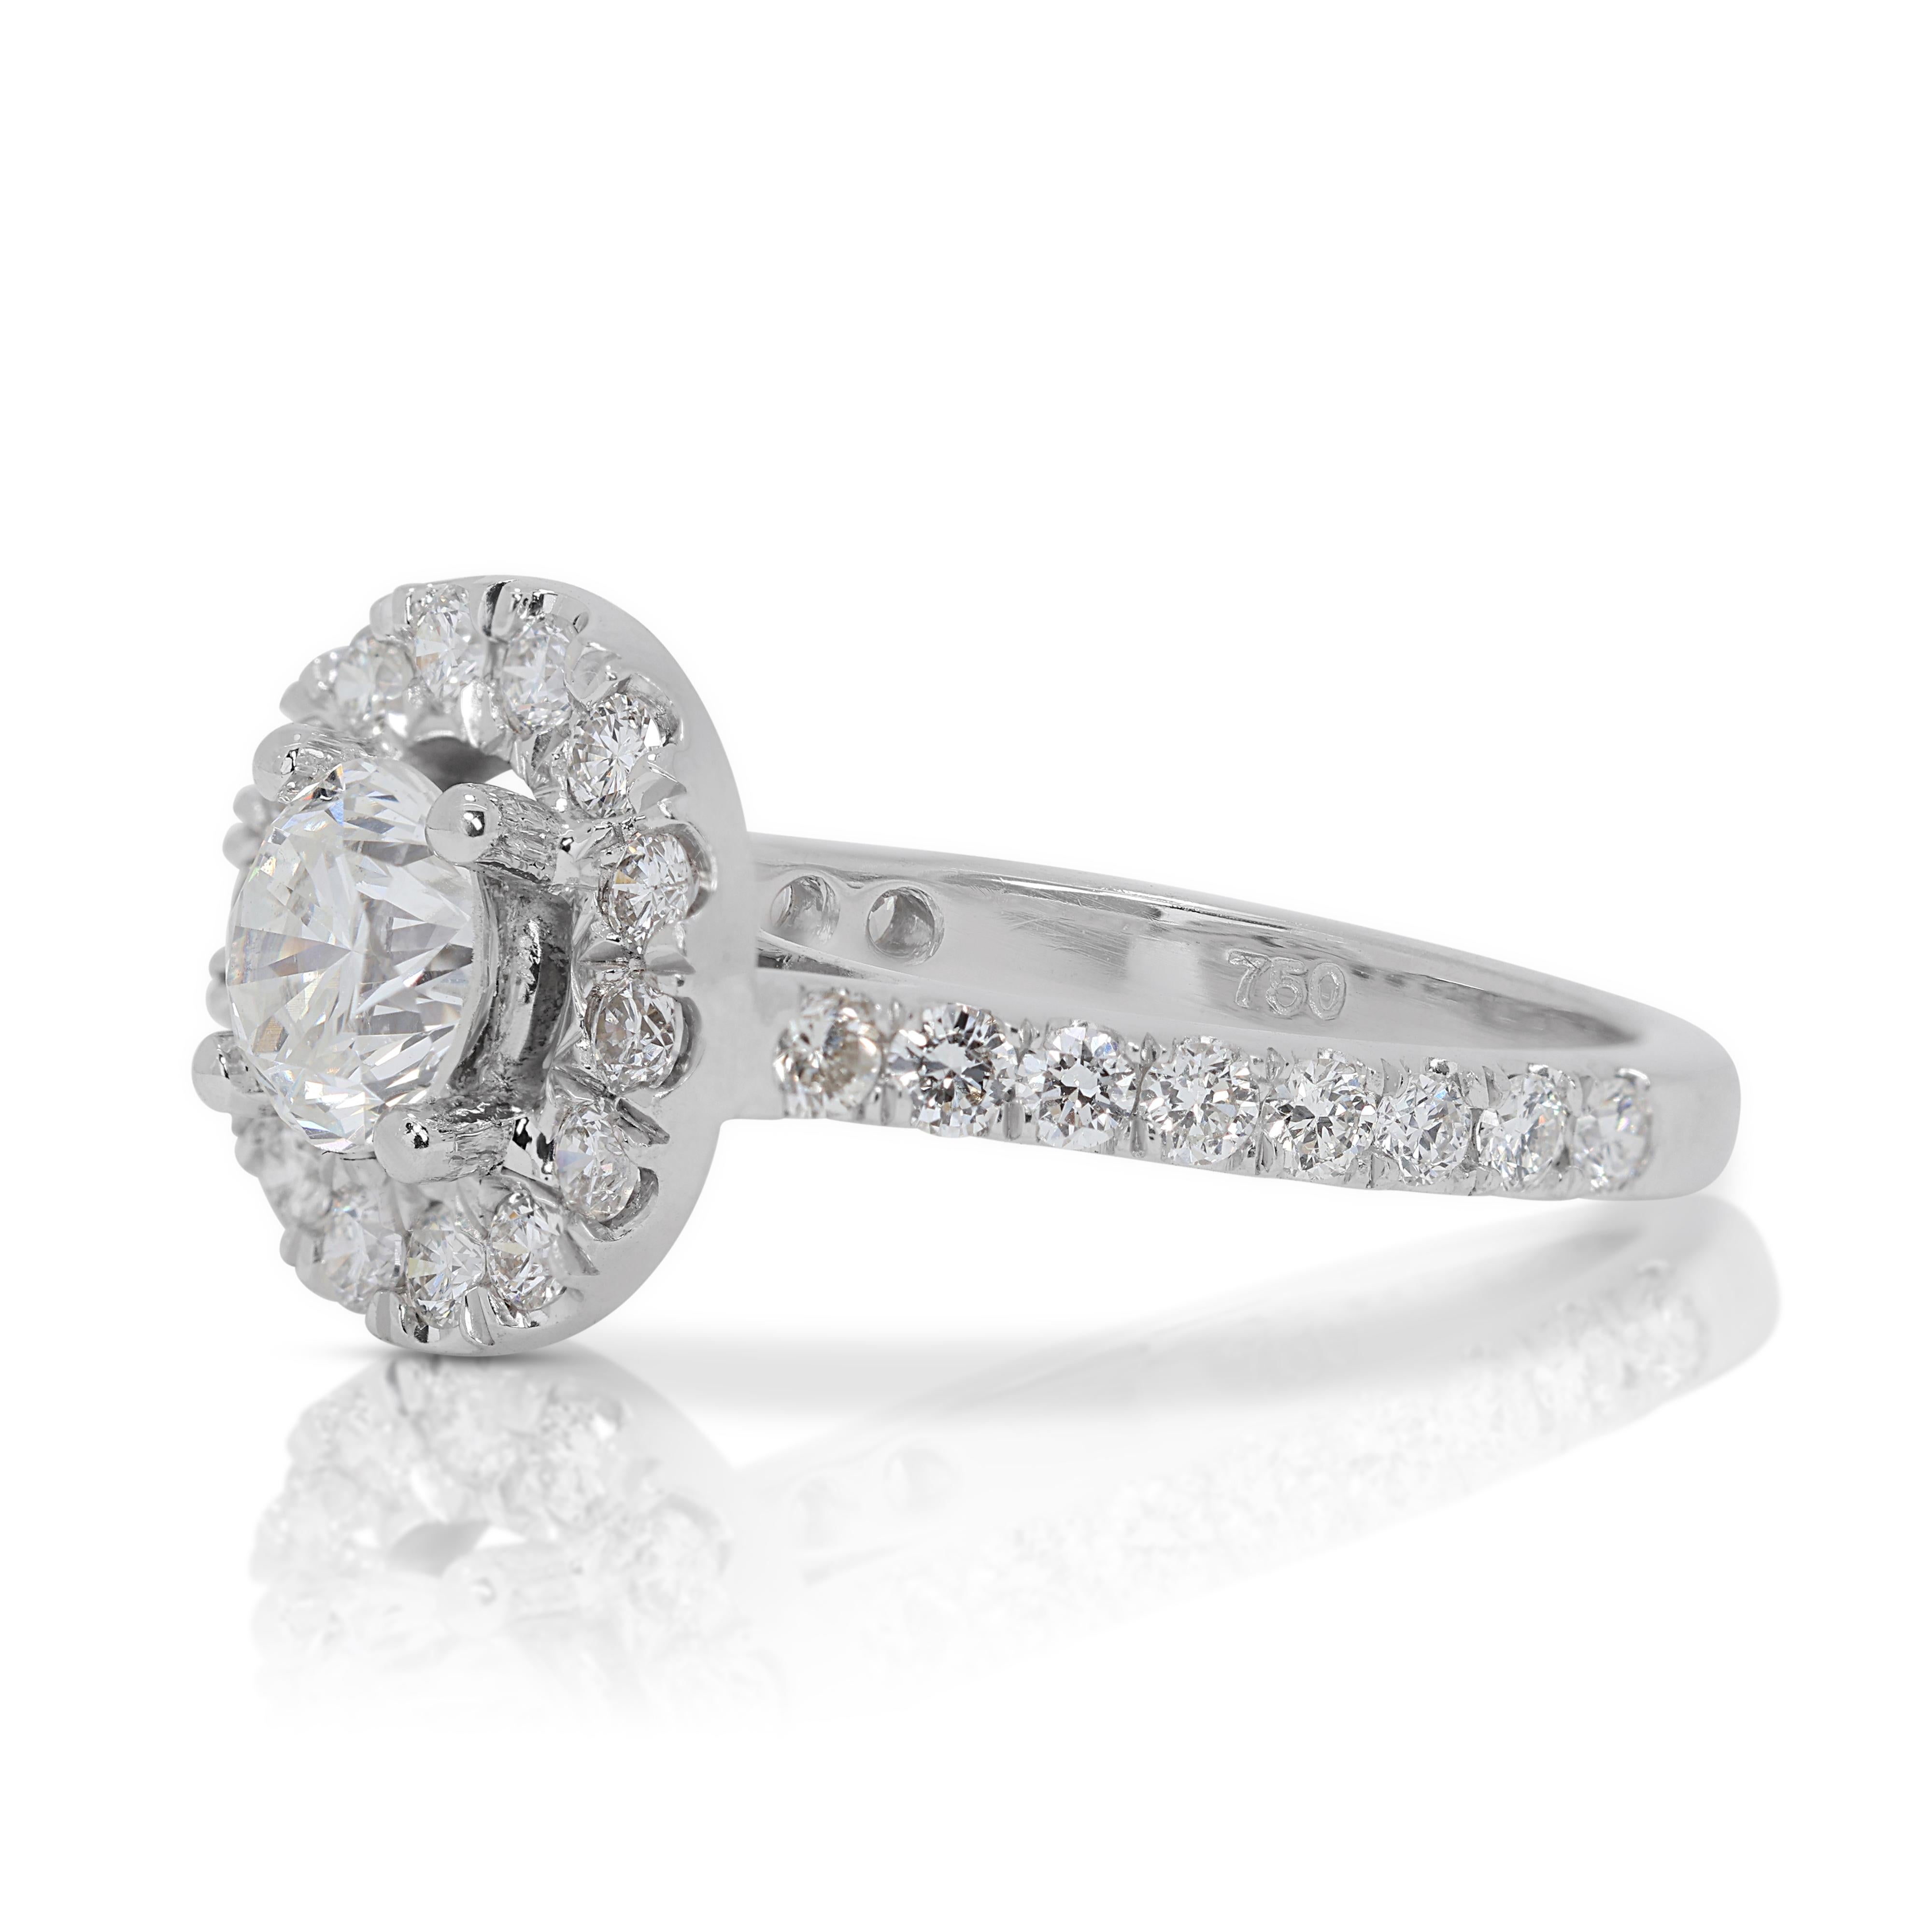 Classic 0.80ct Diamond Pave Ring in 18K White Gold In Excellent Condition For Sale In רמת גן, IL